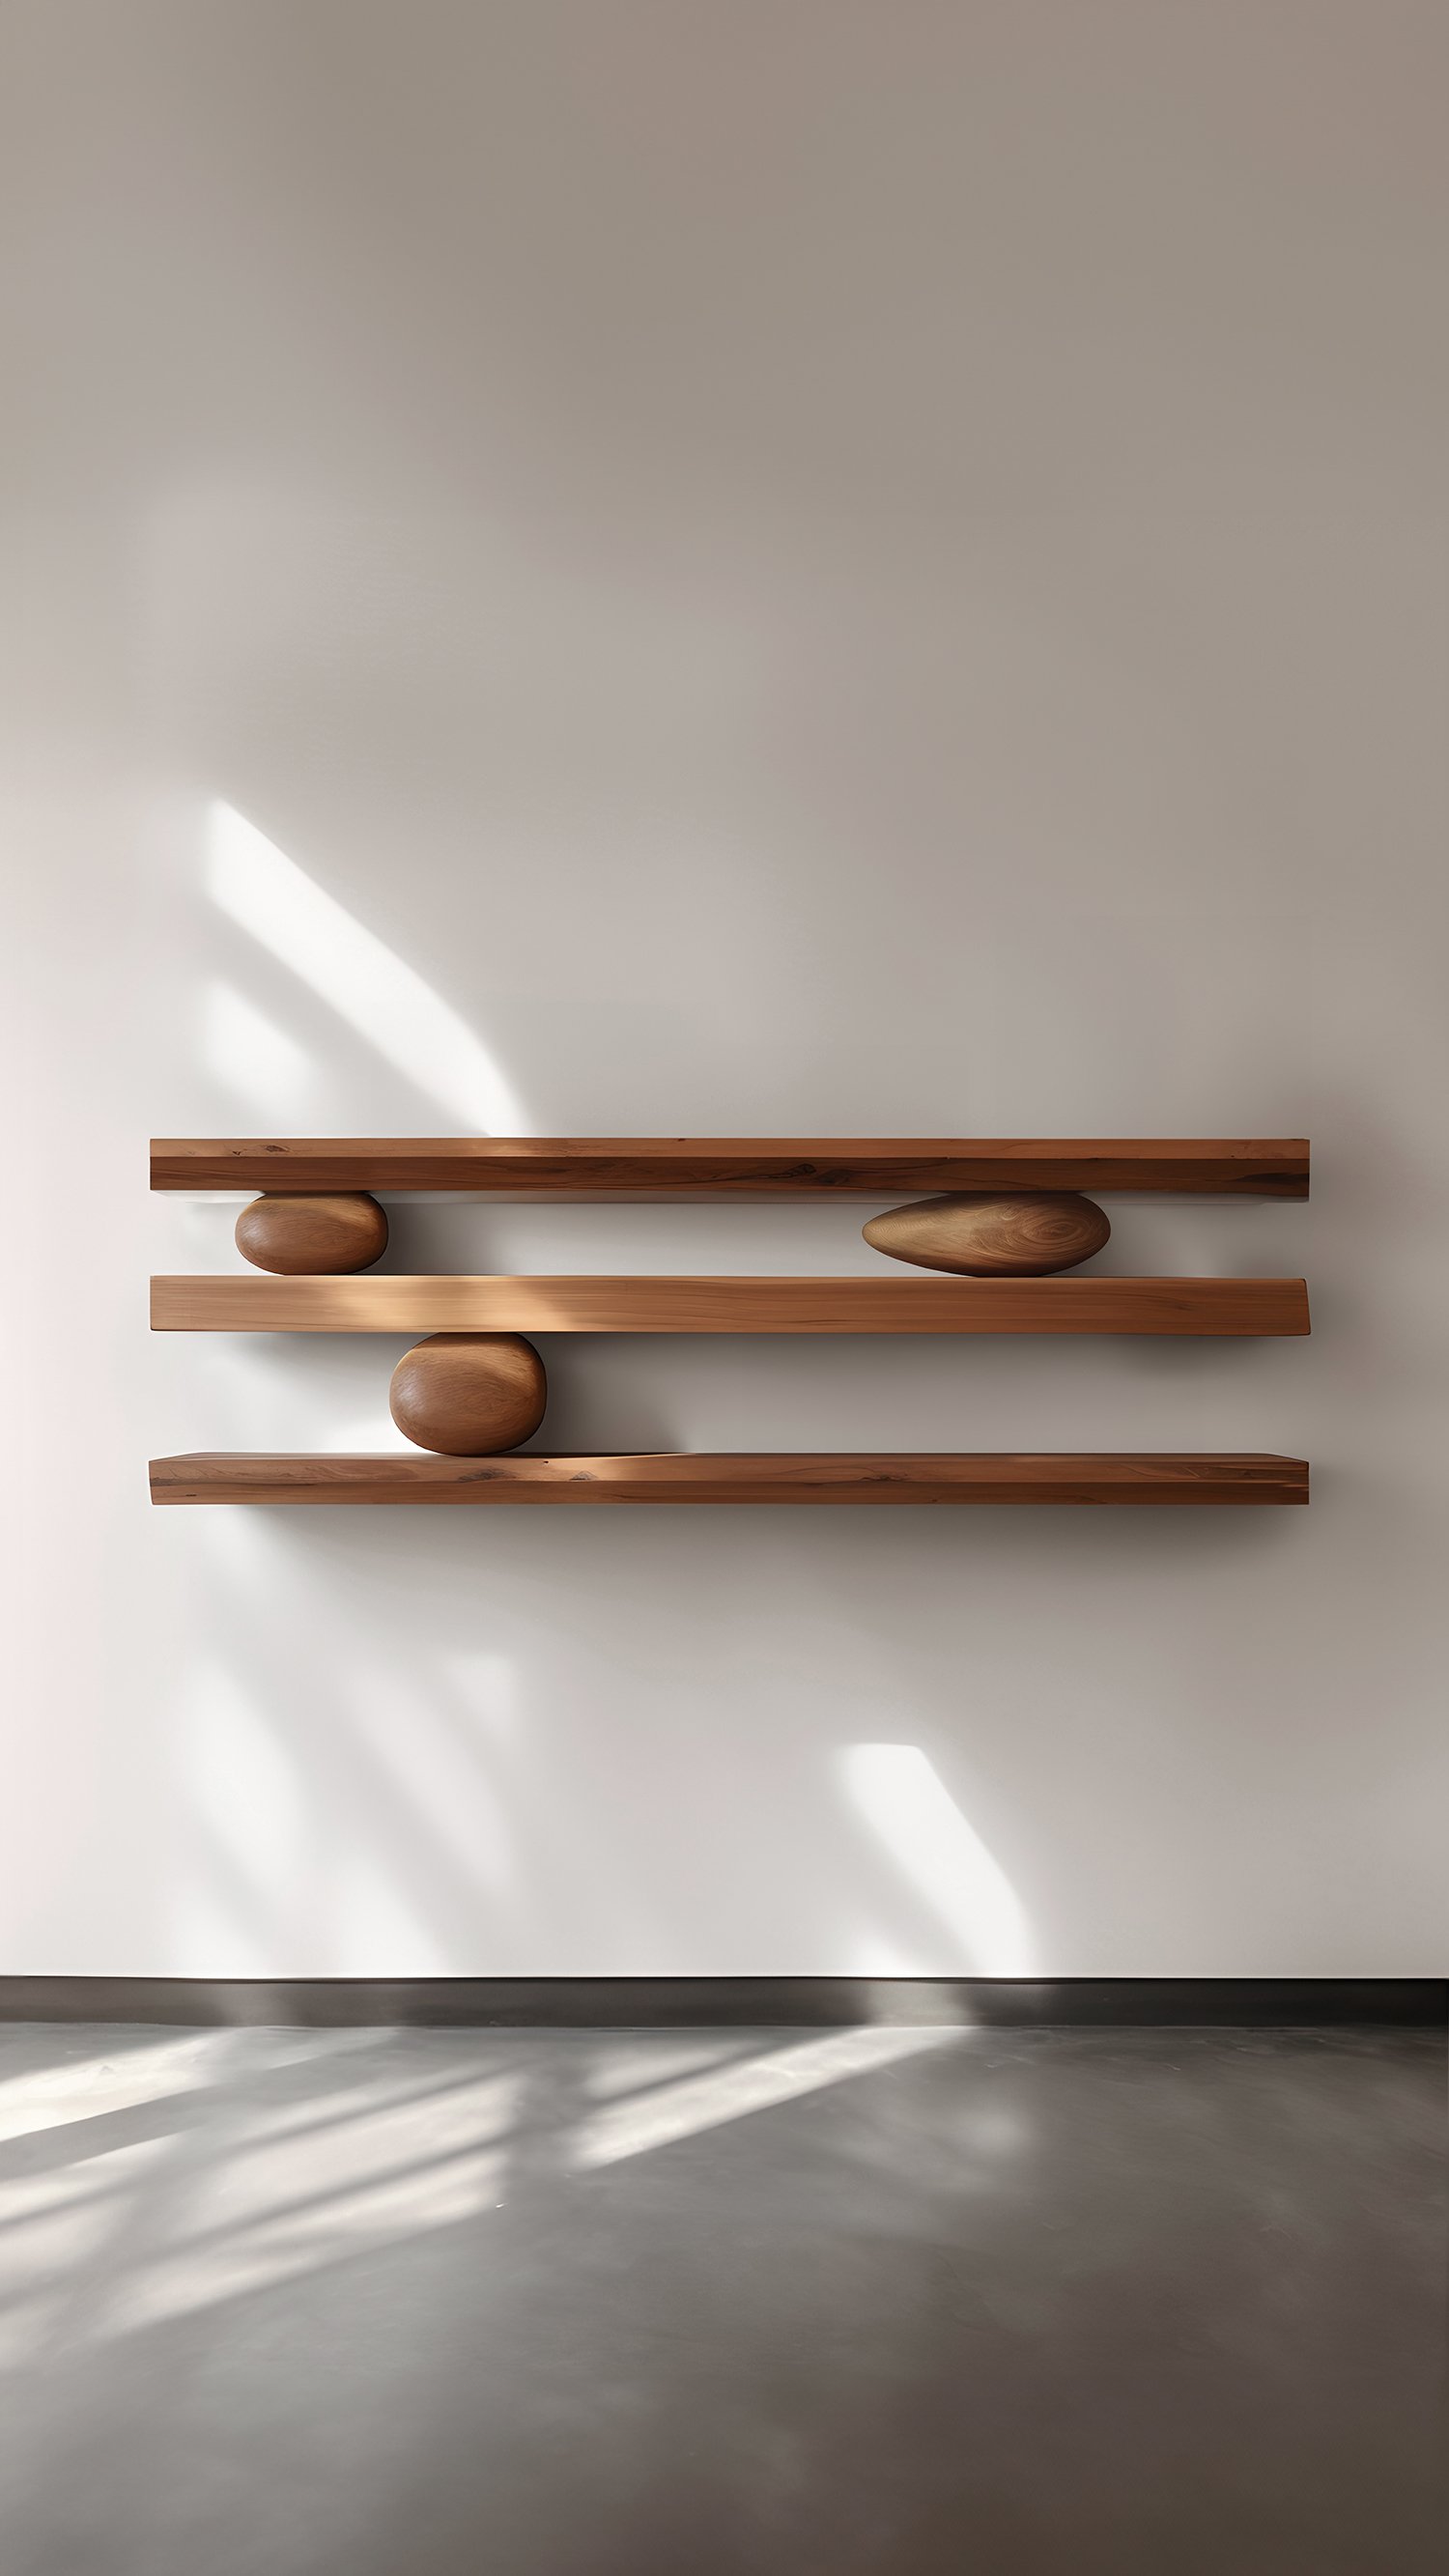 Set of Three Floating Shelves with Three Sculptural Wooden Pebble Accents, Sereno by Joel Escalona — 2.jpg